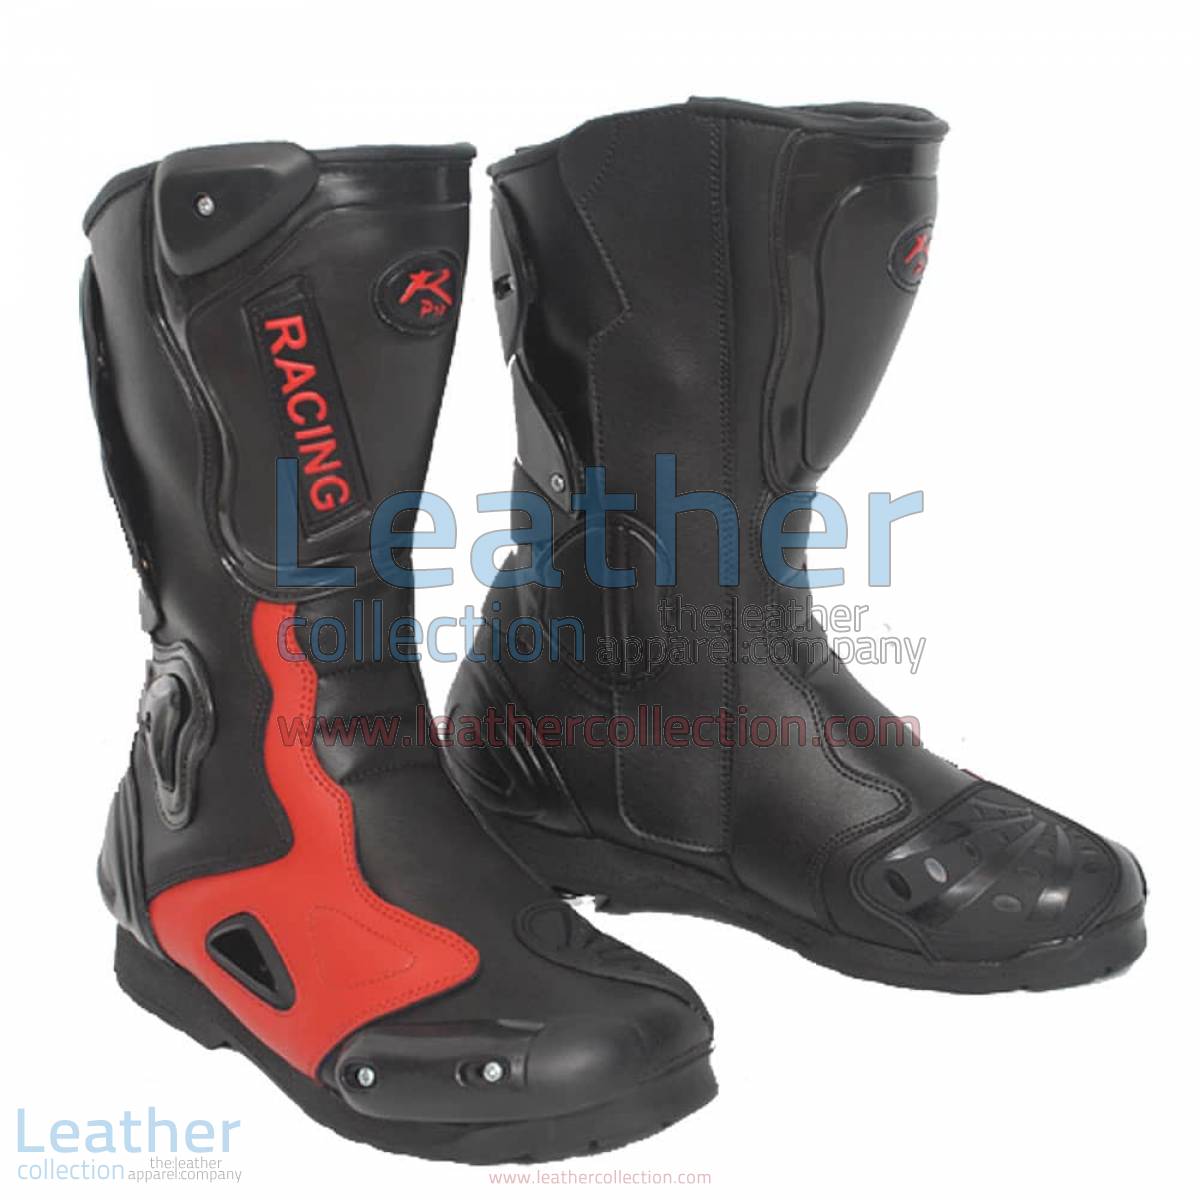 Silverstone Motorcycle Race Boots | motorcycle race boots